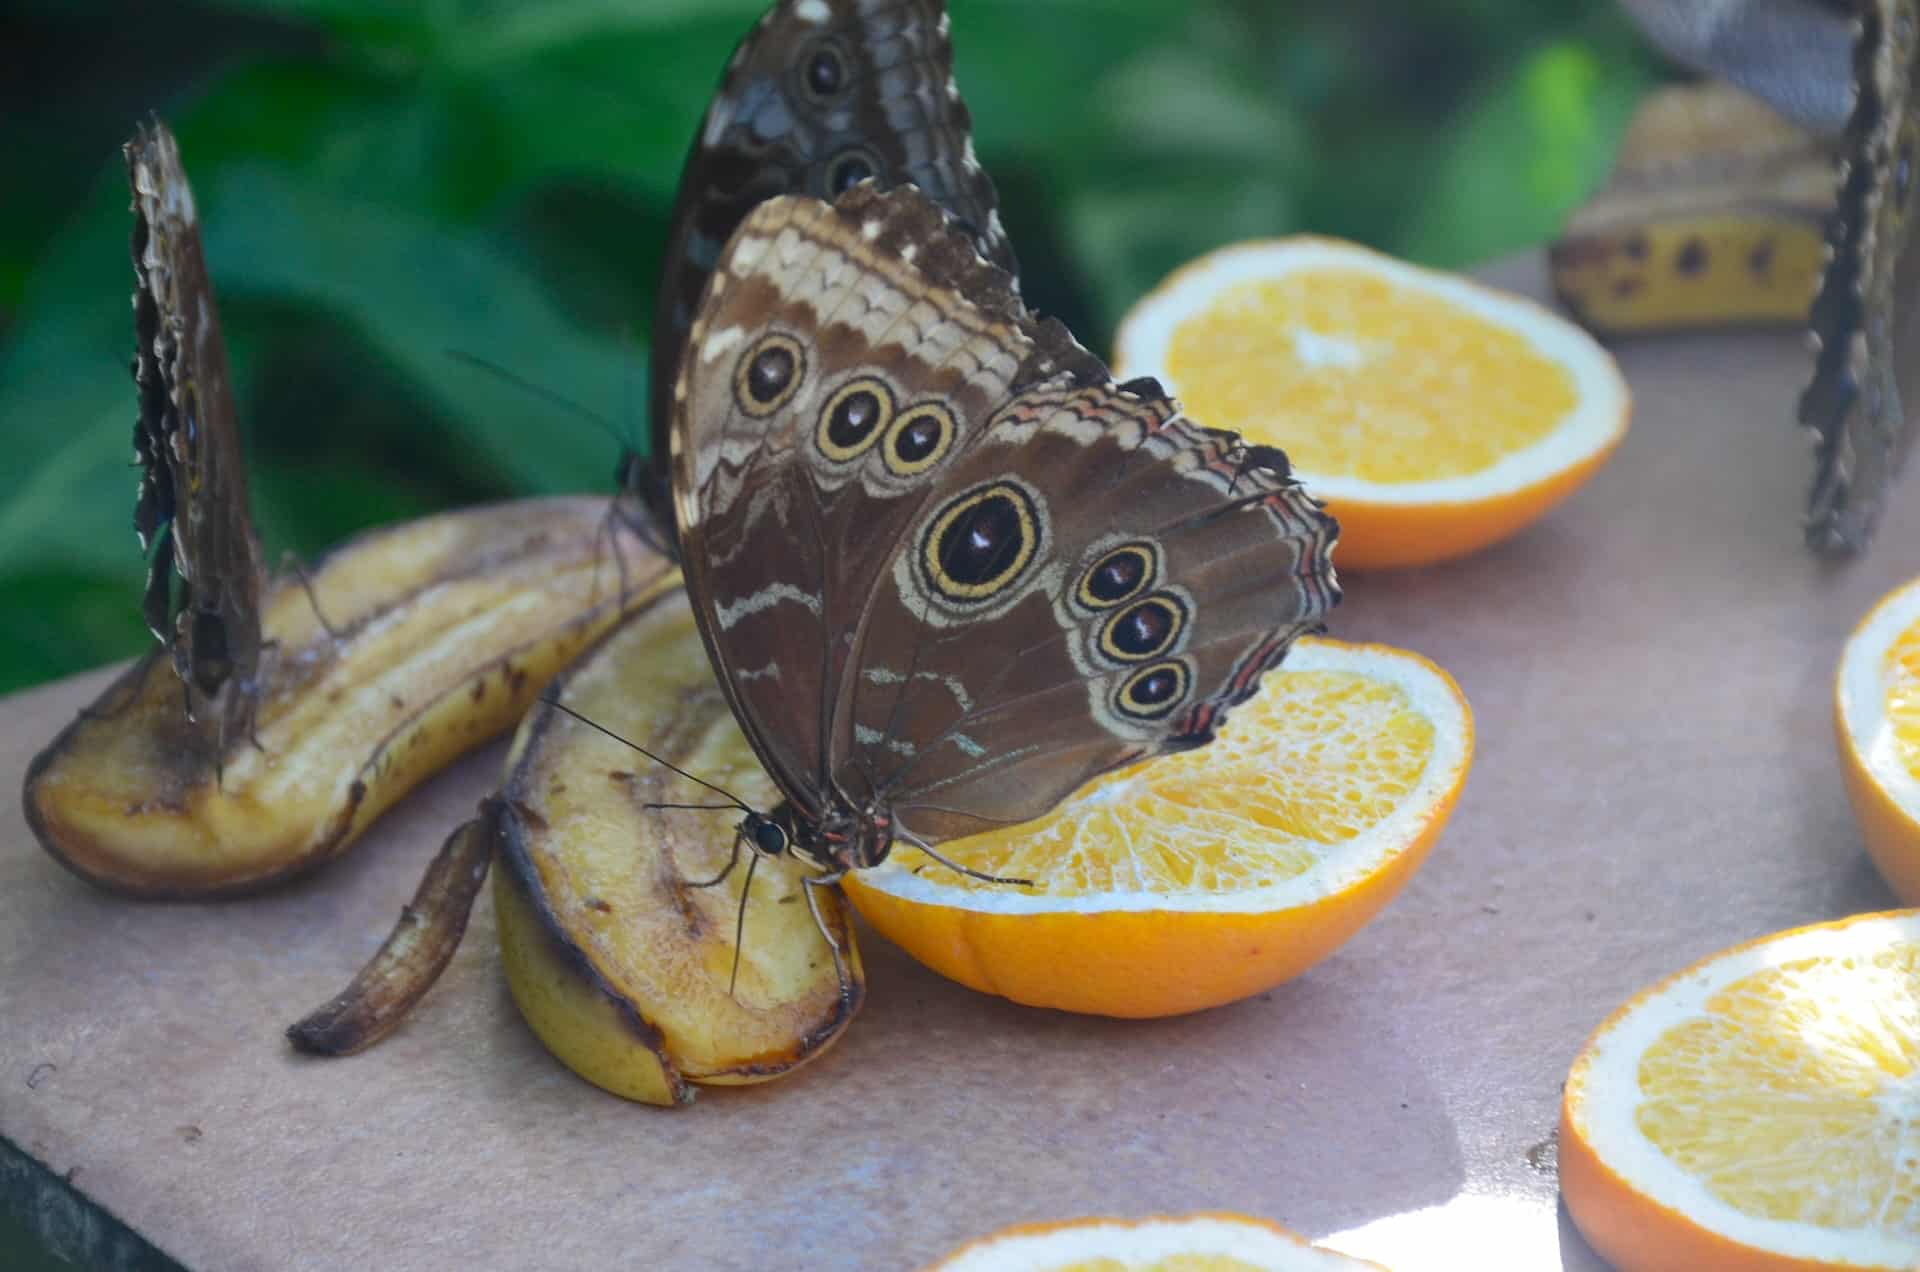 Butterfly feeding on bananas and oranges